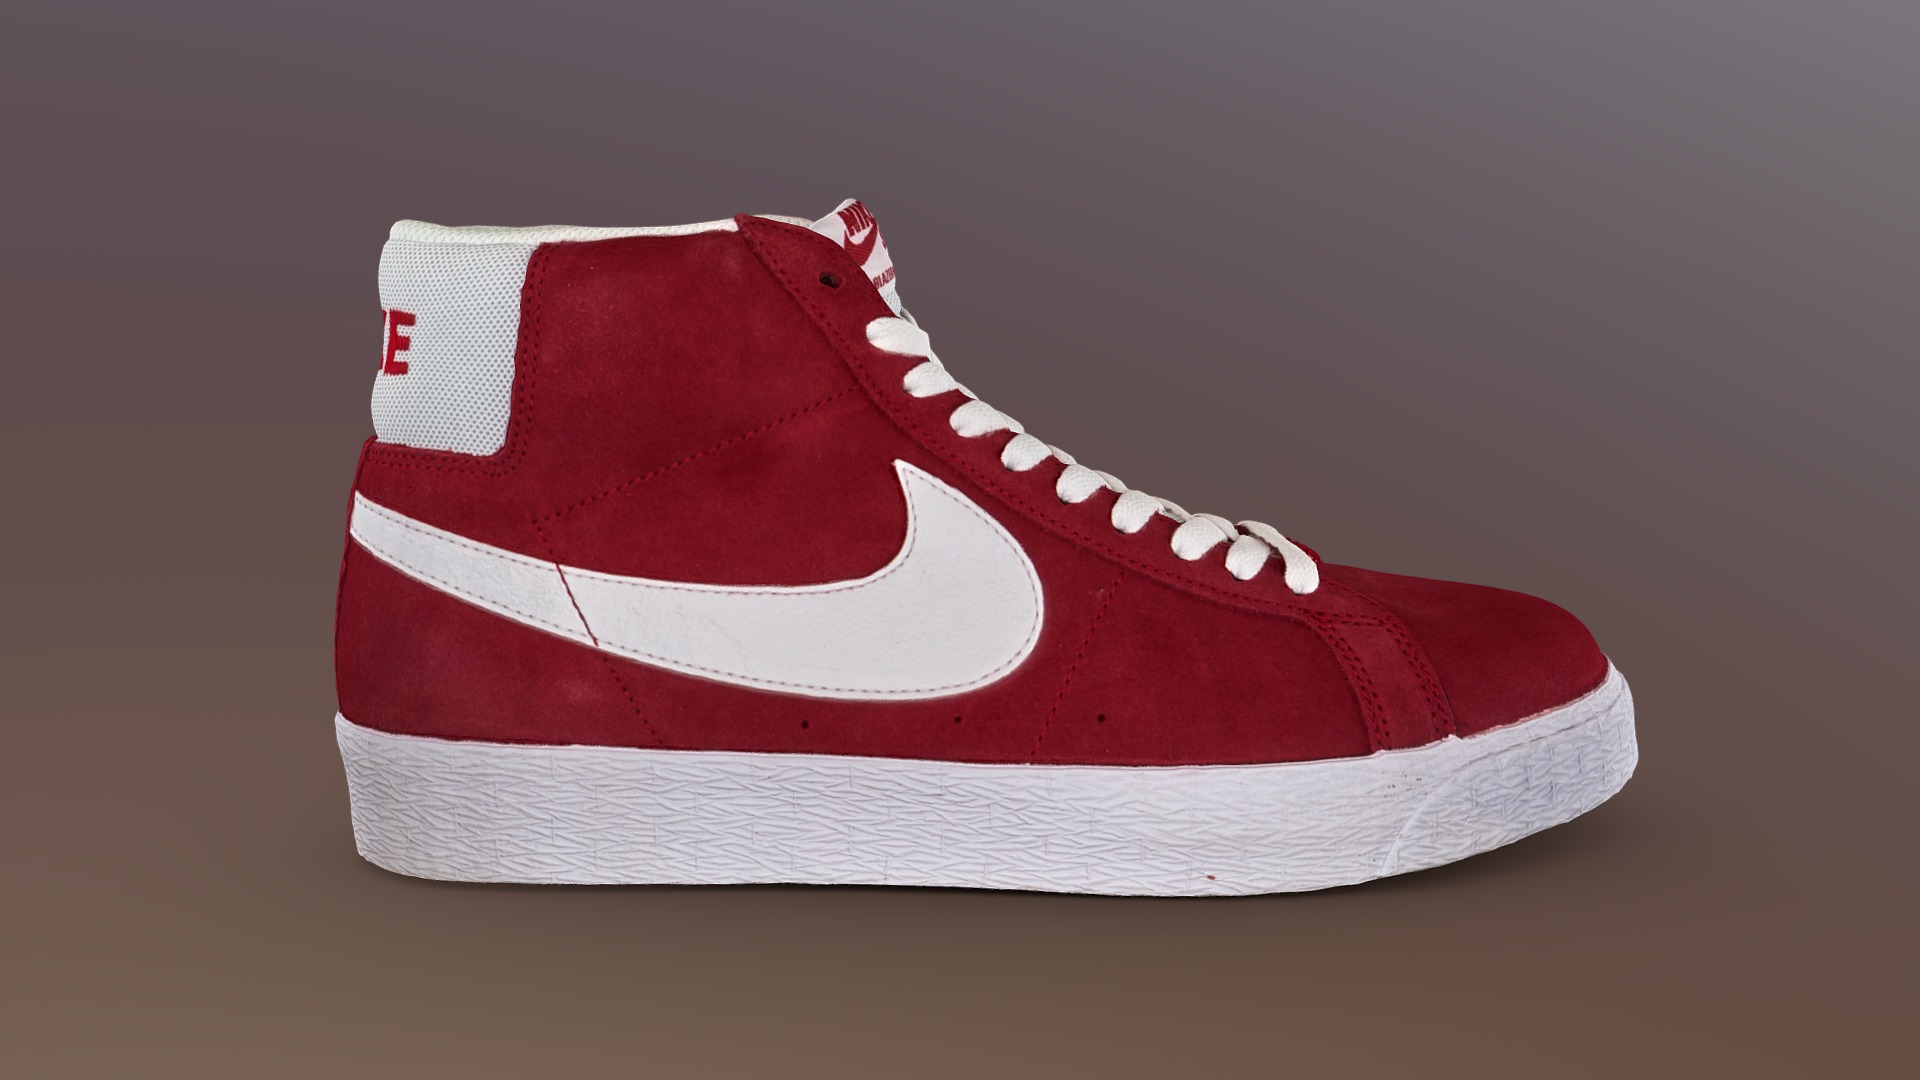 3D model Nike SB Zoom Blazer - This is a 3D model of the Nike SB Zoom Blazer. The 3D model is about a red and white striped shoe.